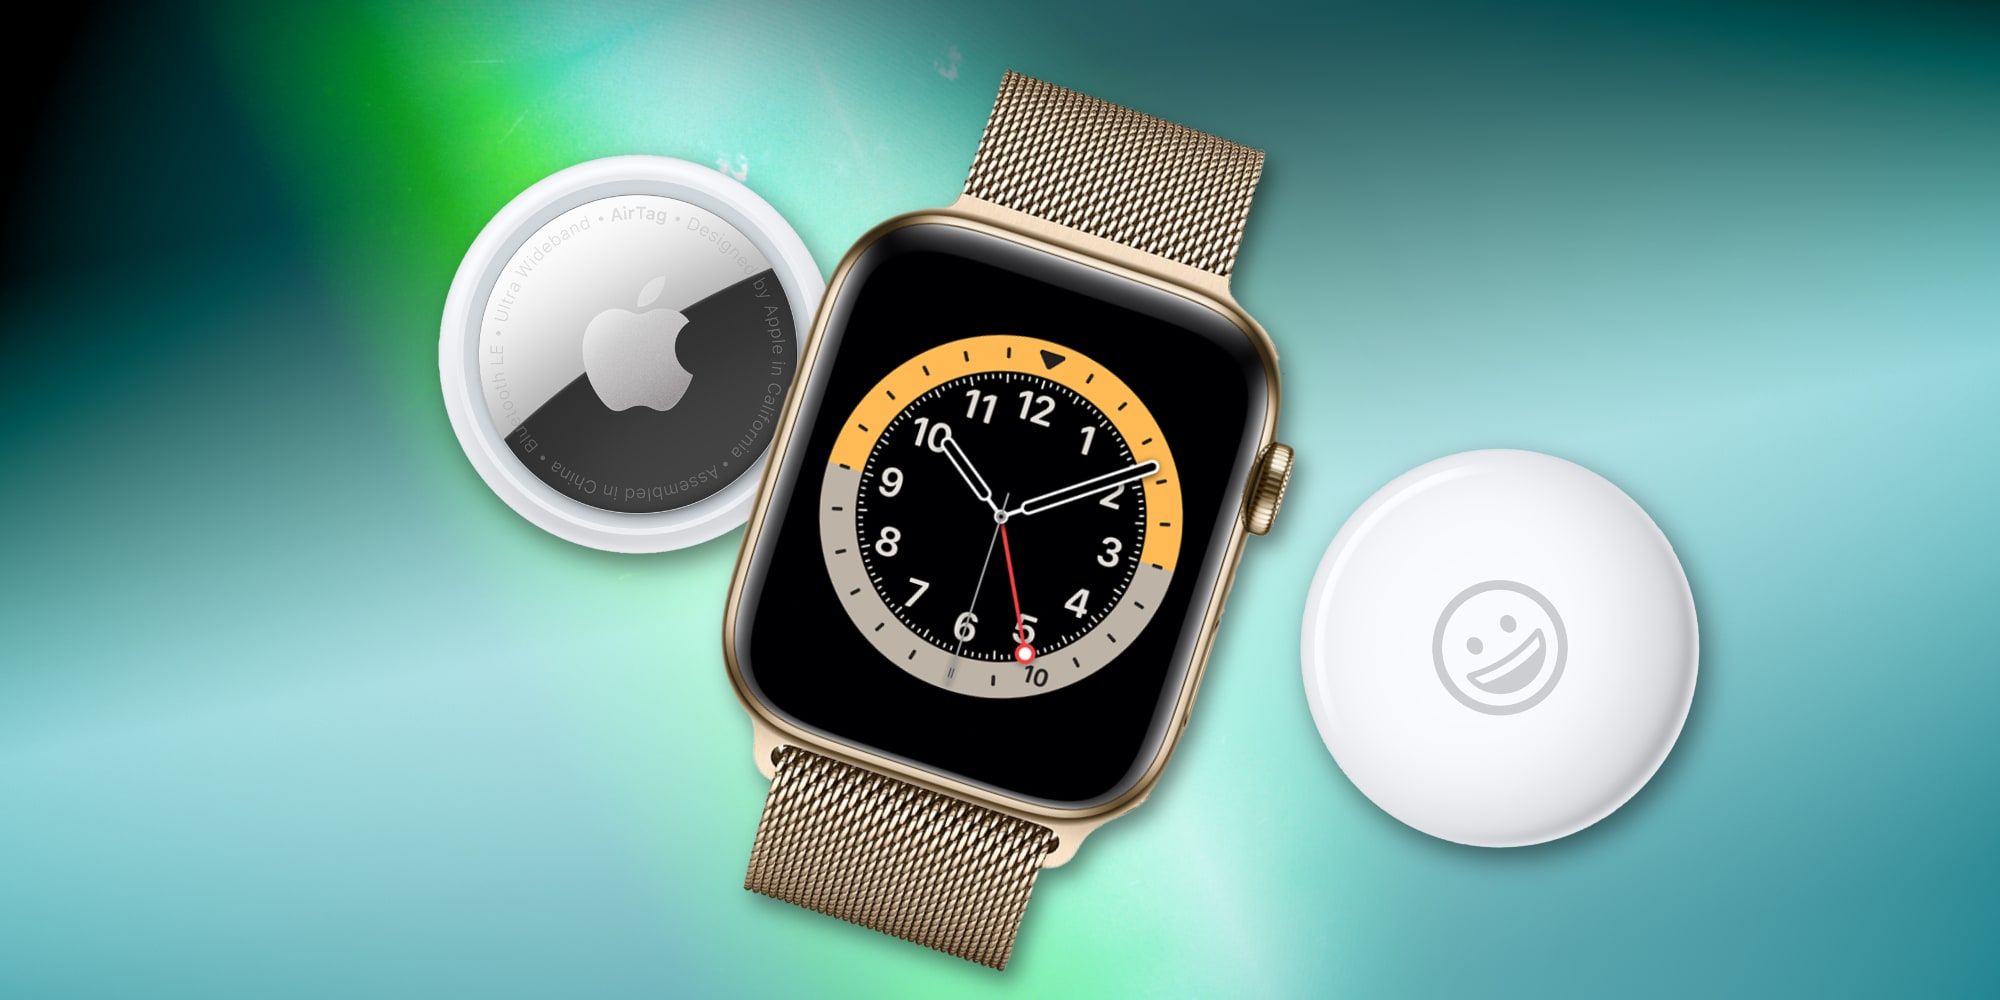 Apple Watch And AirTag Beacons